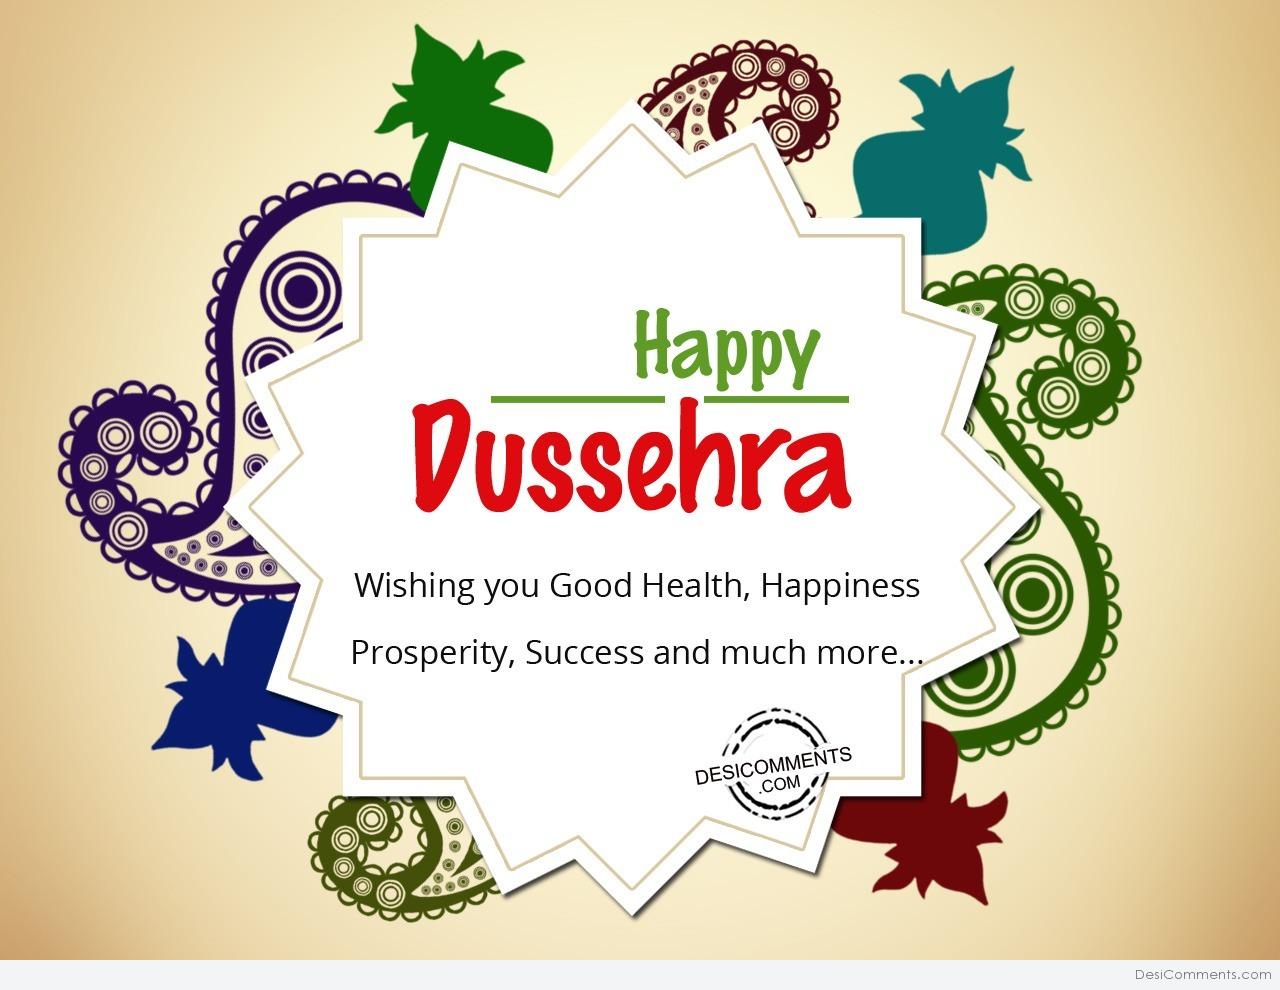 Wishing you good health….Happy Dussehra - DesiComments.com